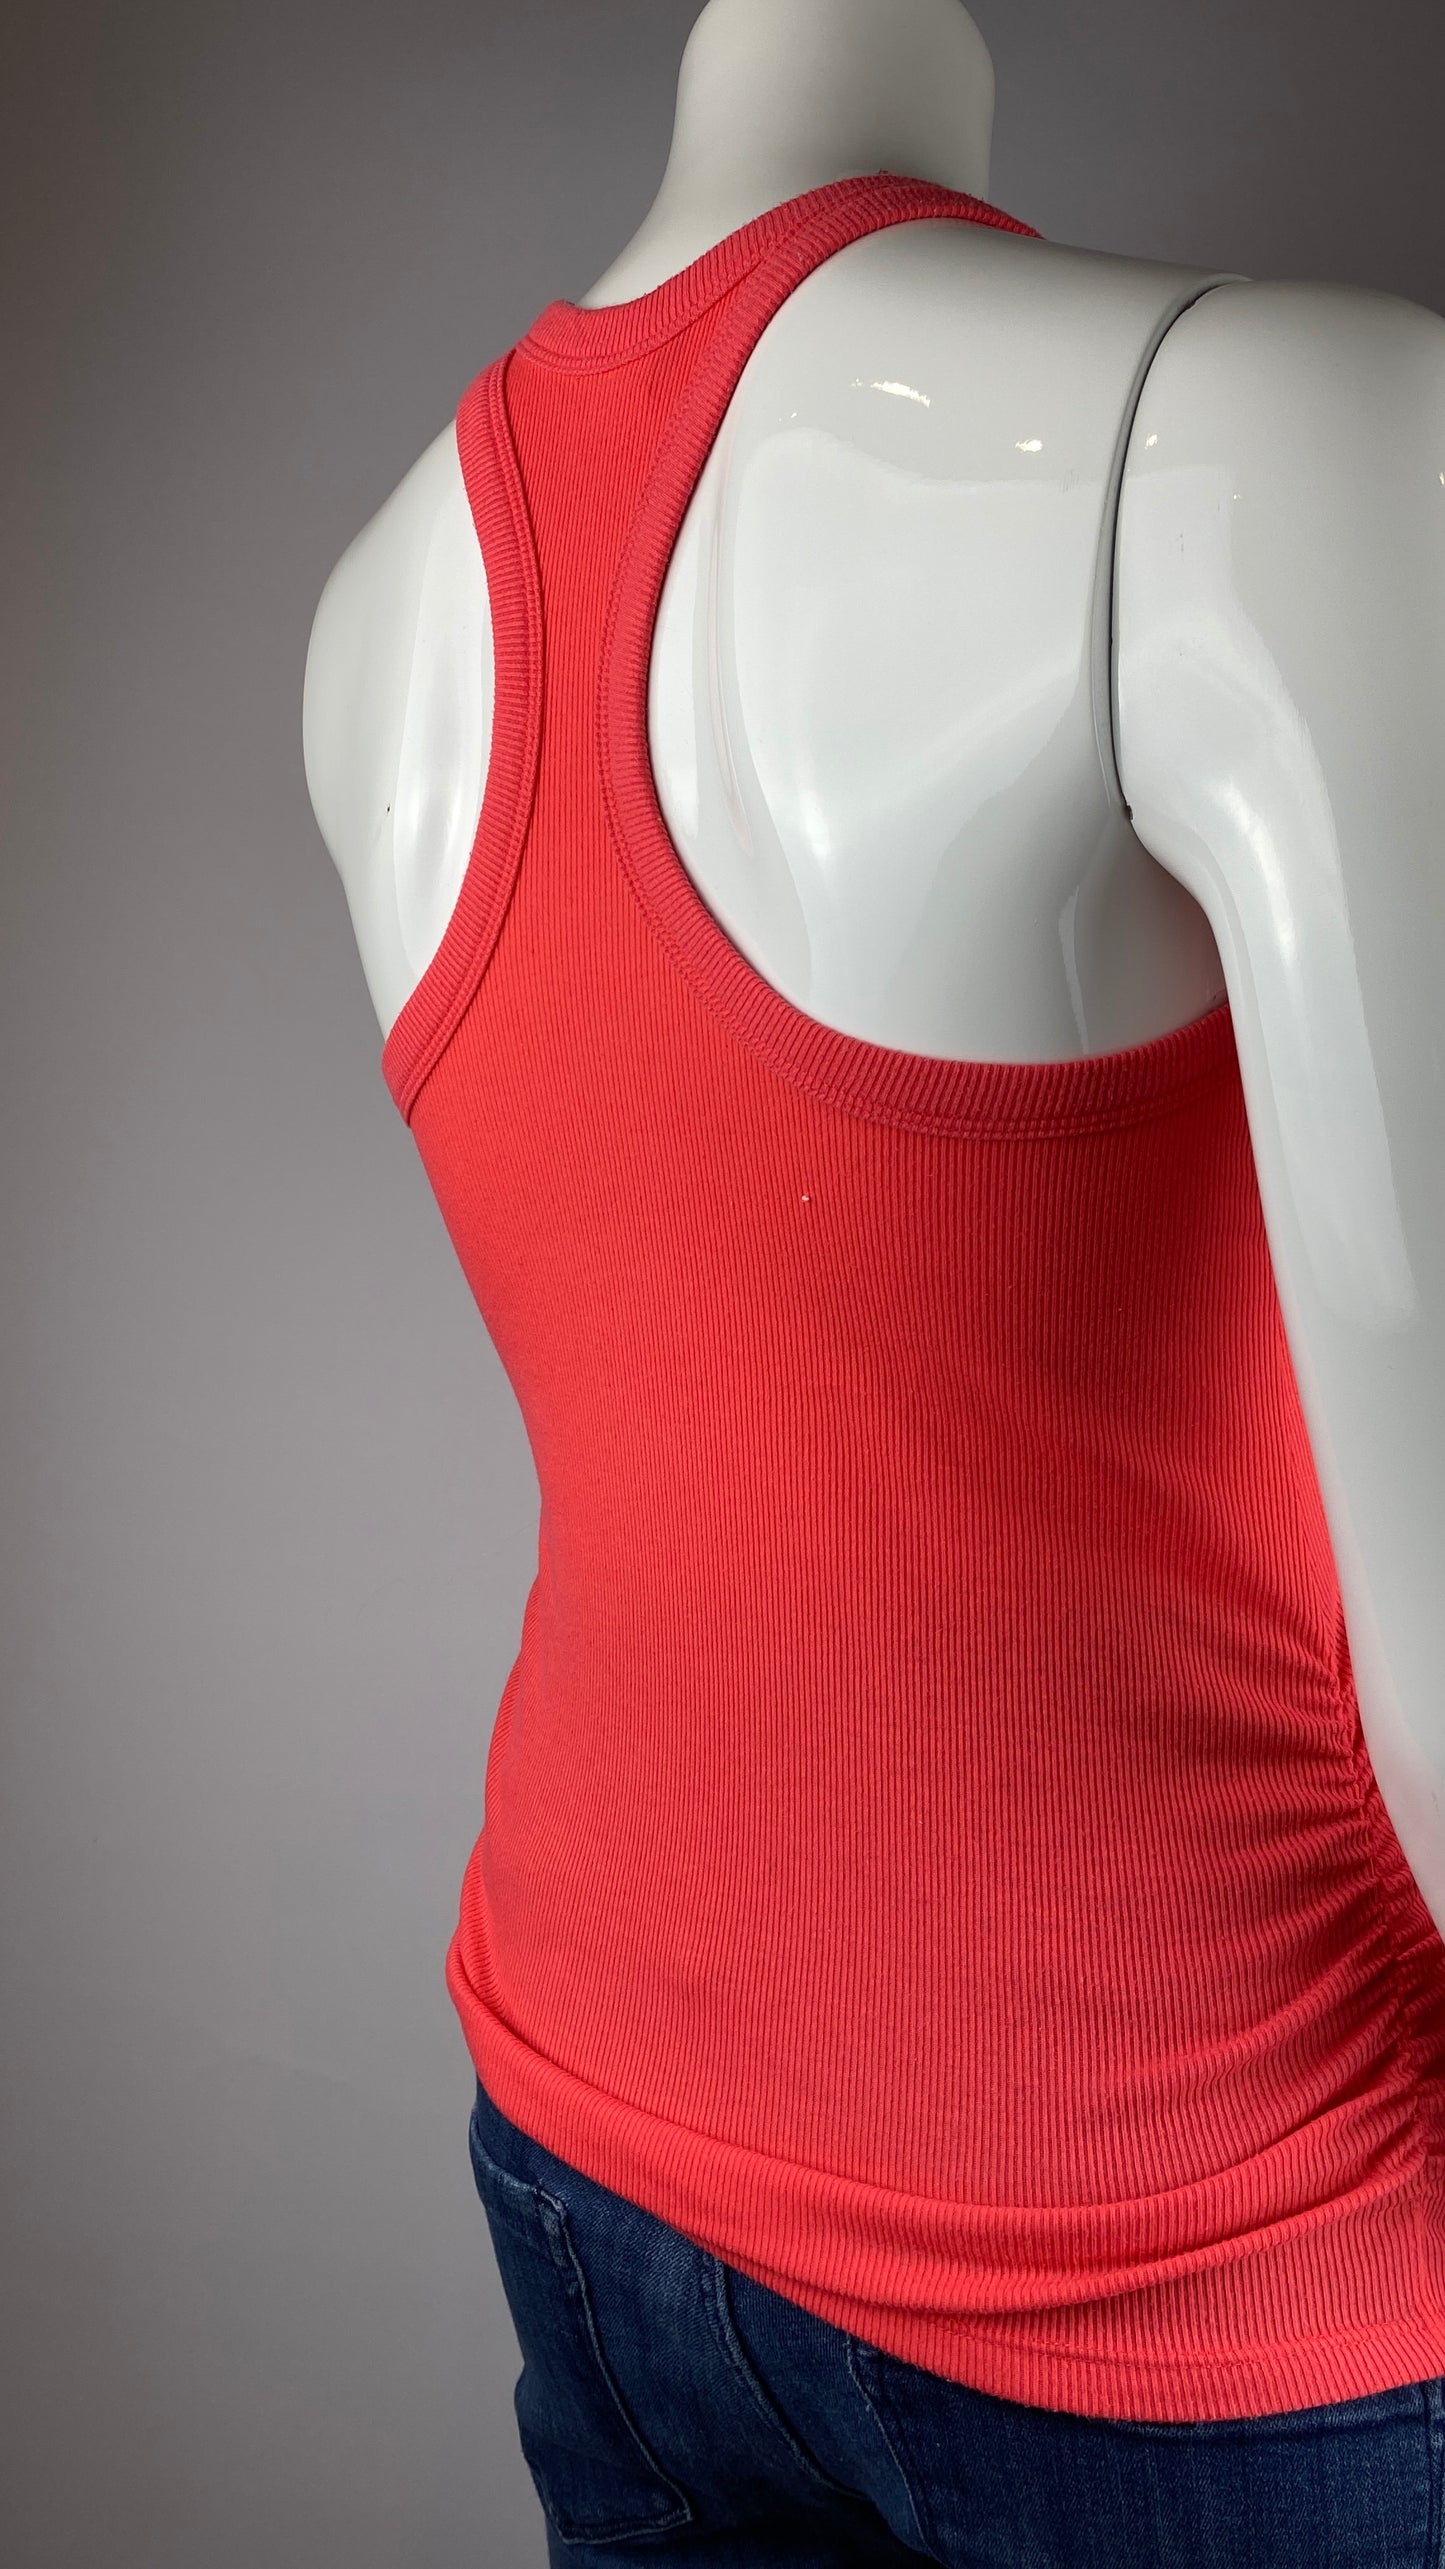 XSMALL - Camisole Old Navy